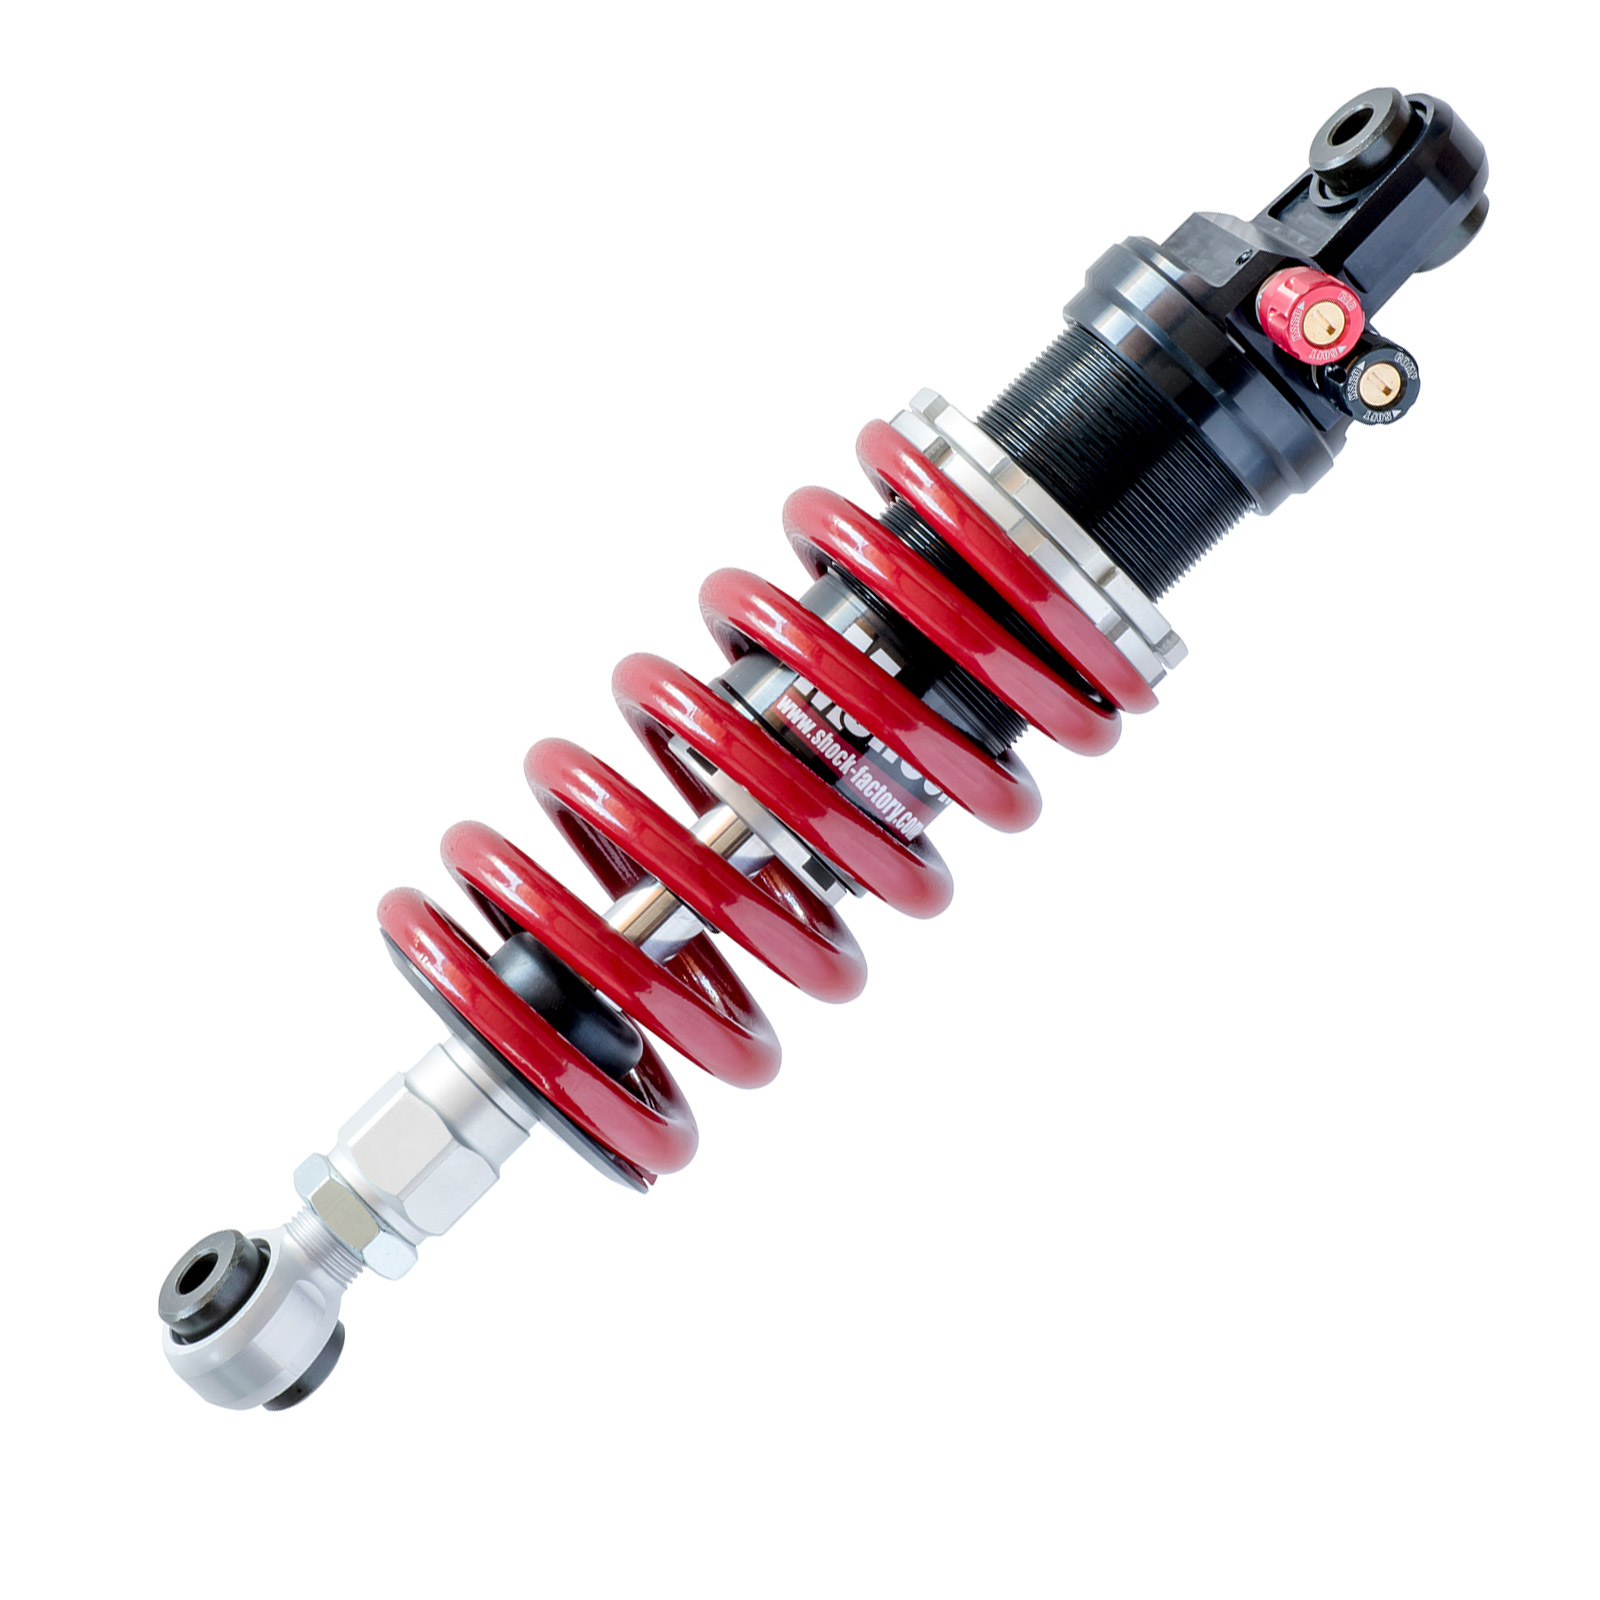 Factory M-SHOCK 2 shock absorber with ride height adjuster